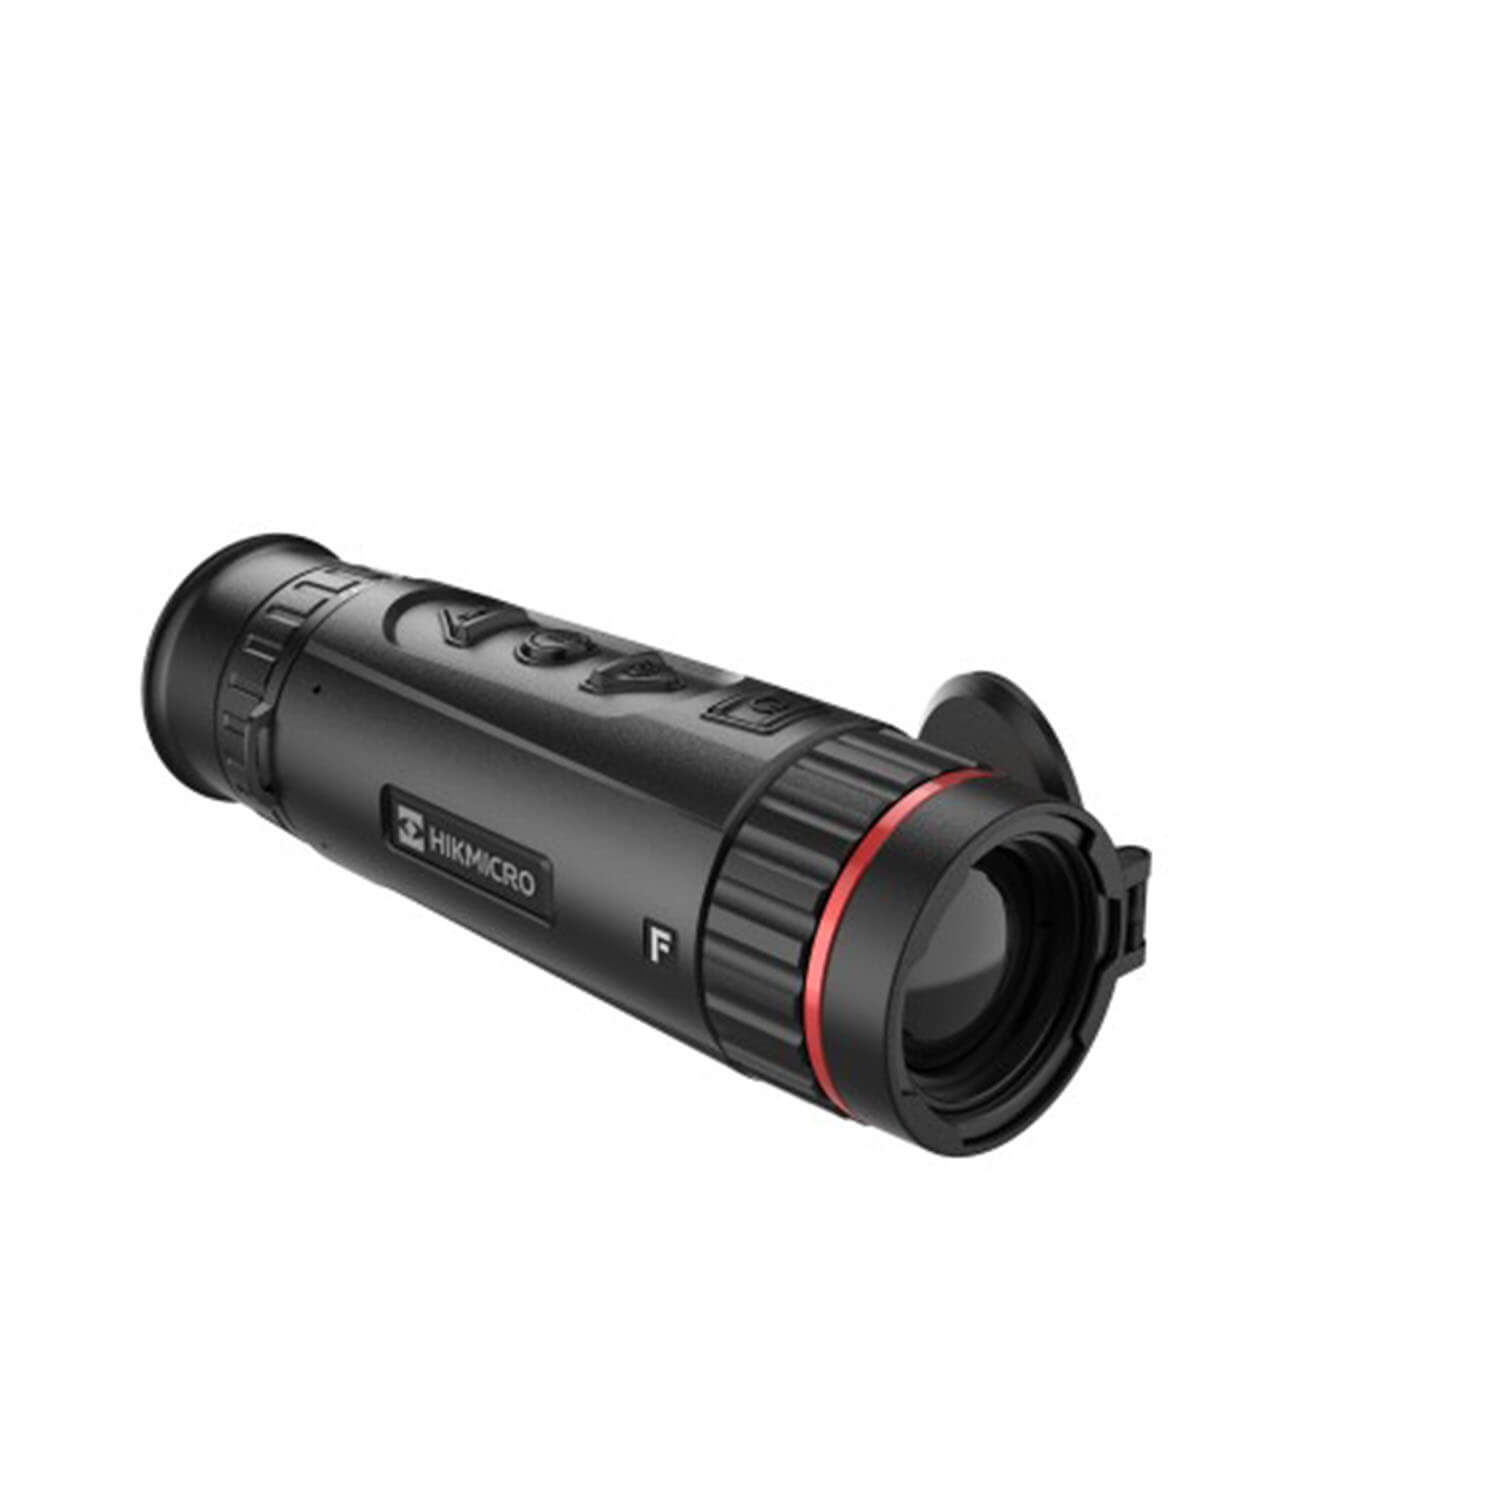 Hikmicro thermal imaging scope Falcon FH35 - Night Vision Devices